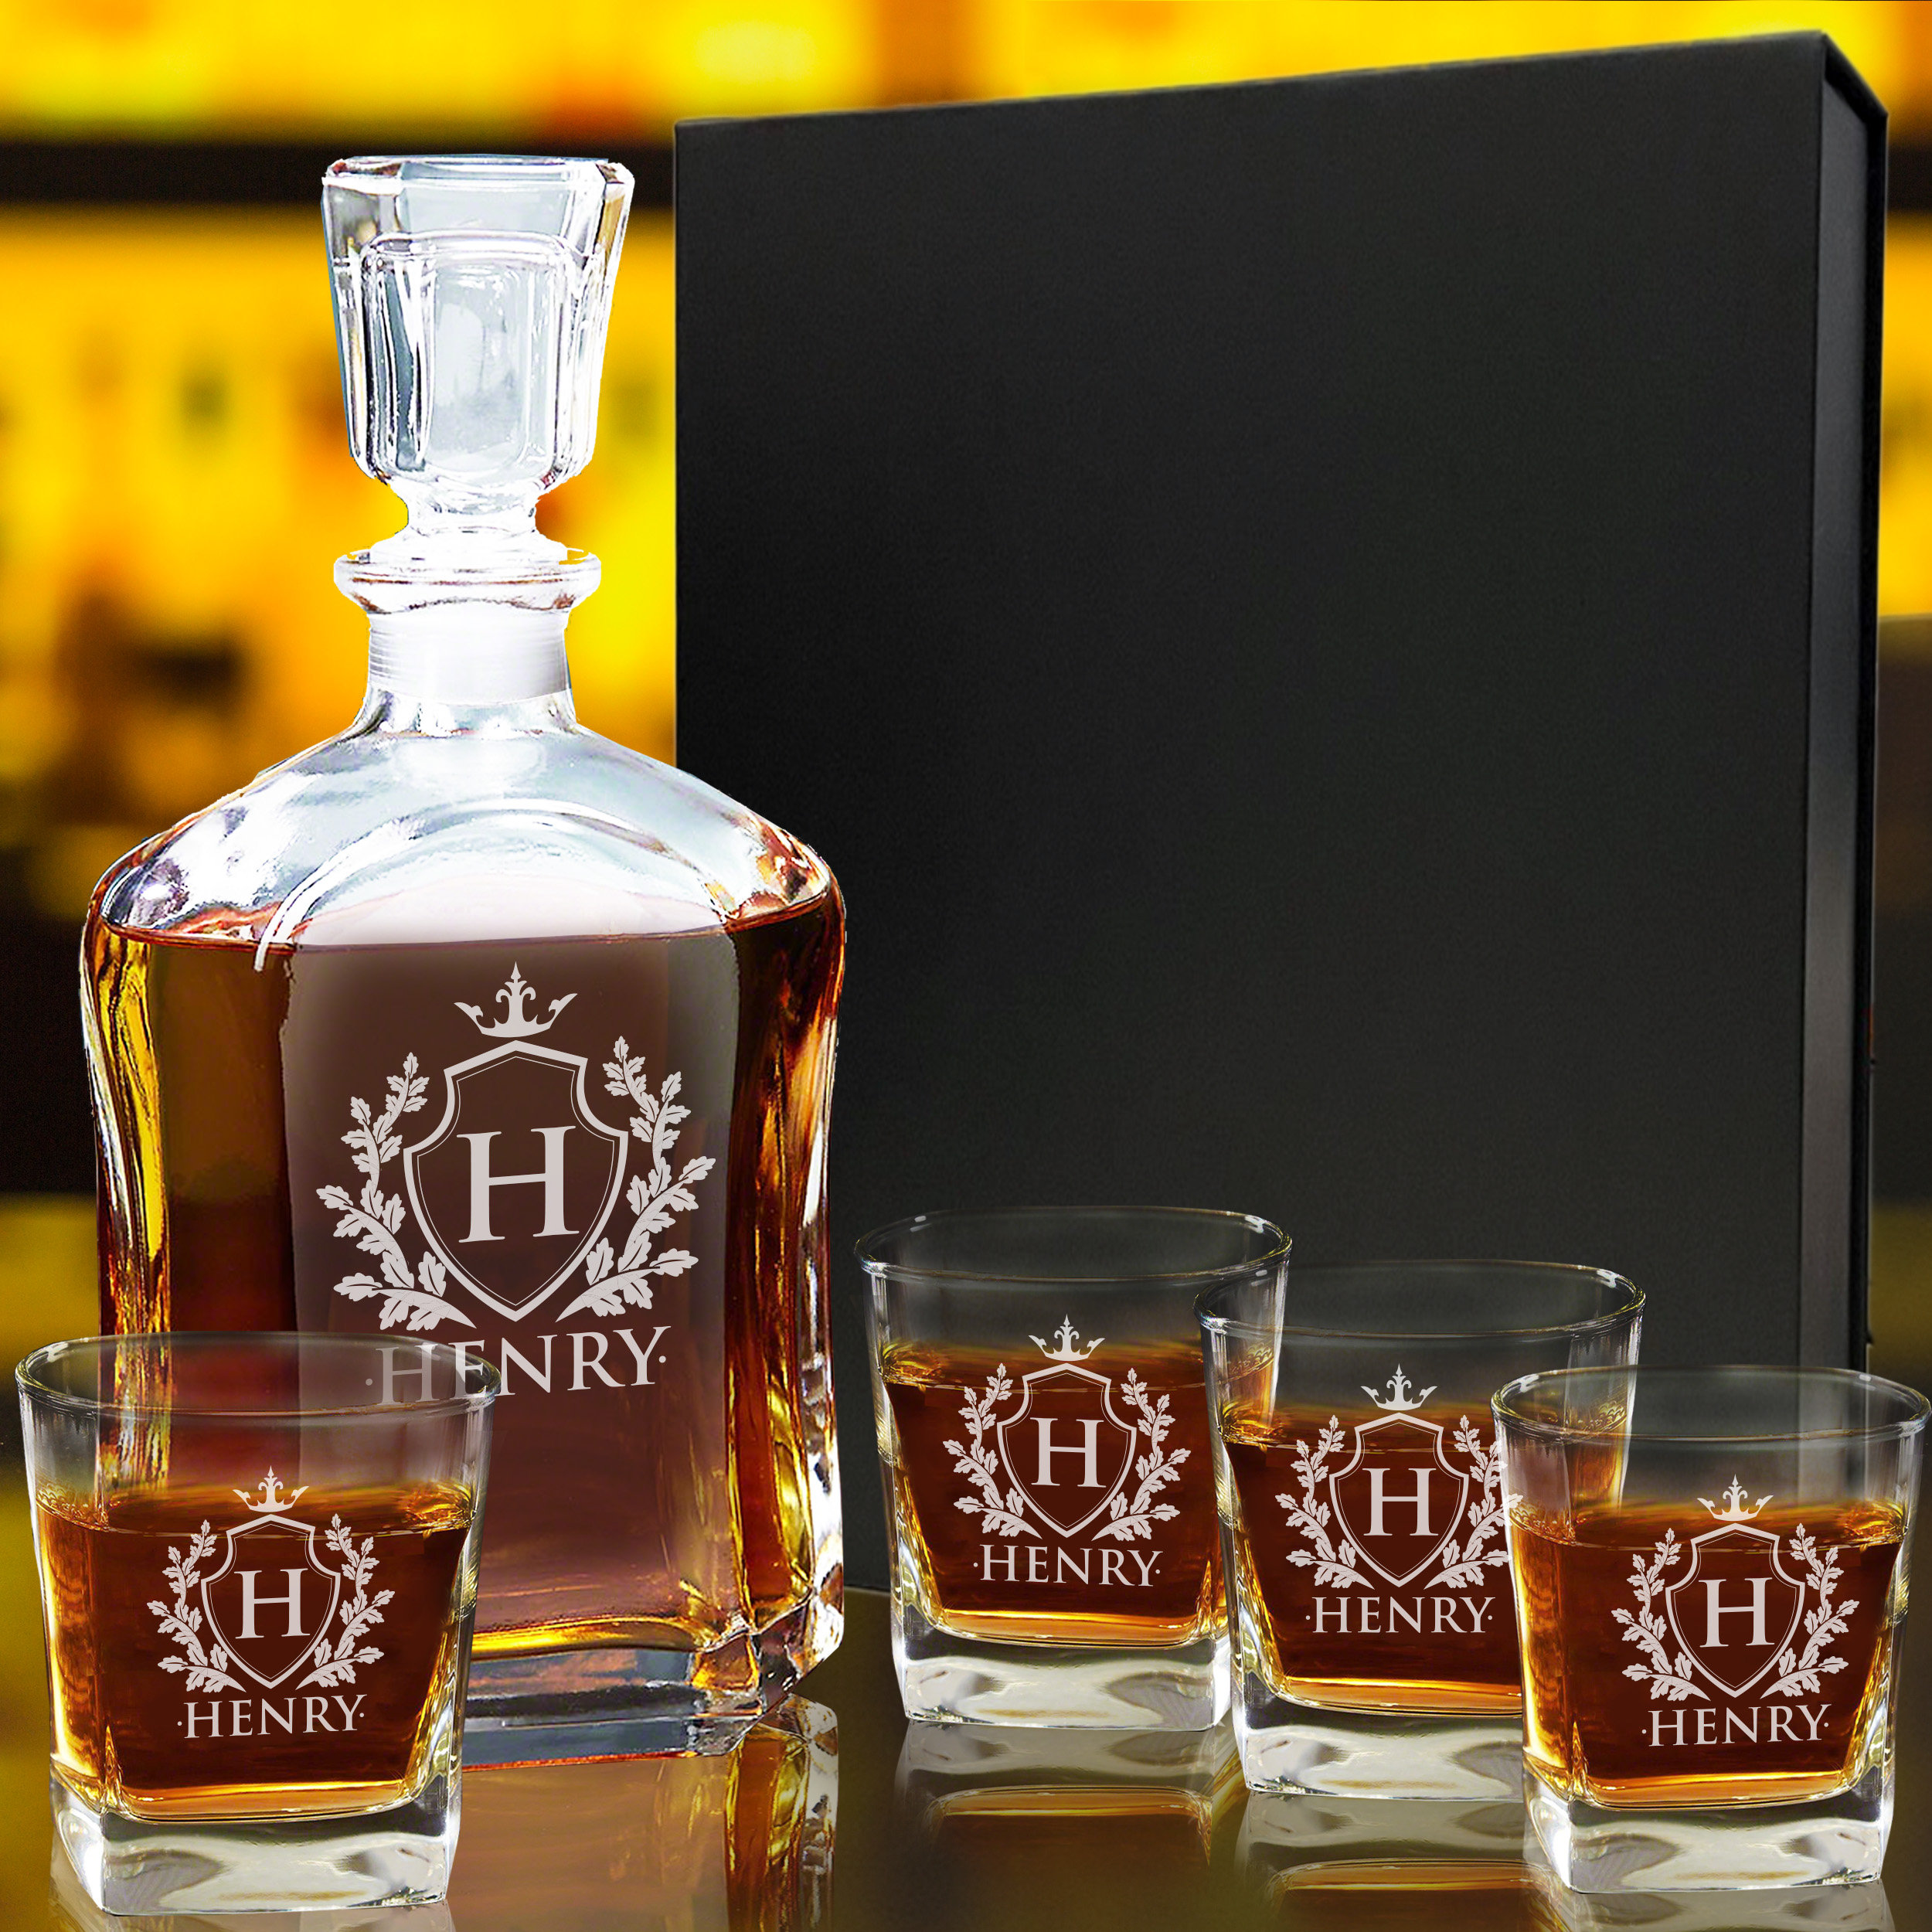 Whiskey Glass Gift Set | Whiskey Set with Stones for Men & Women with Wooden Box | Mixology & Craft